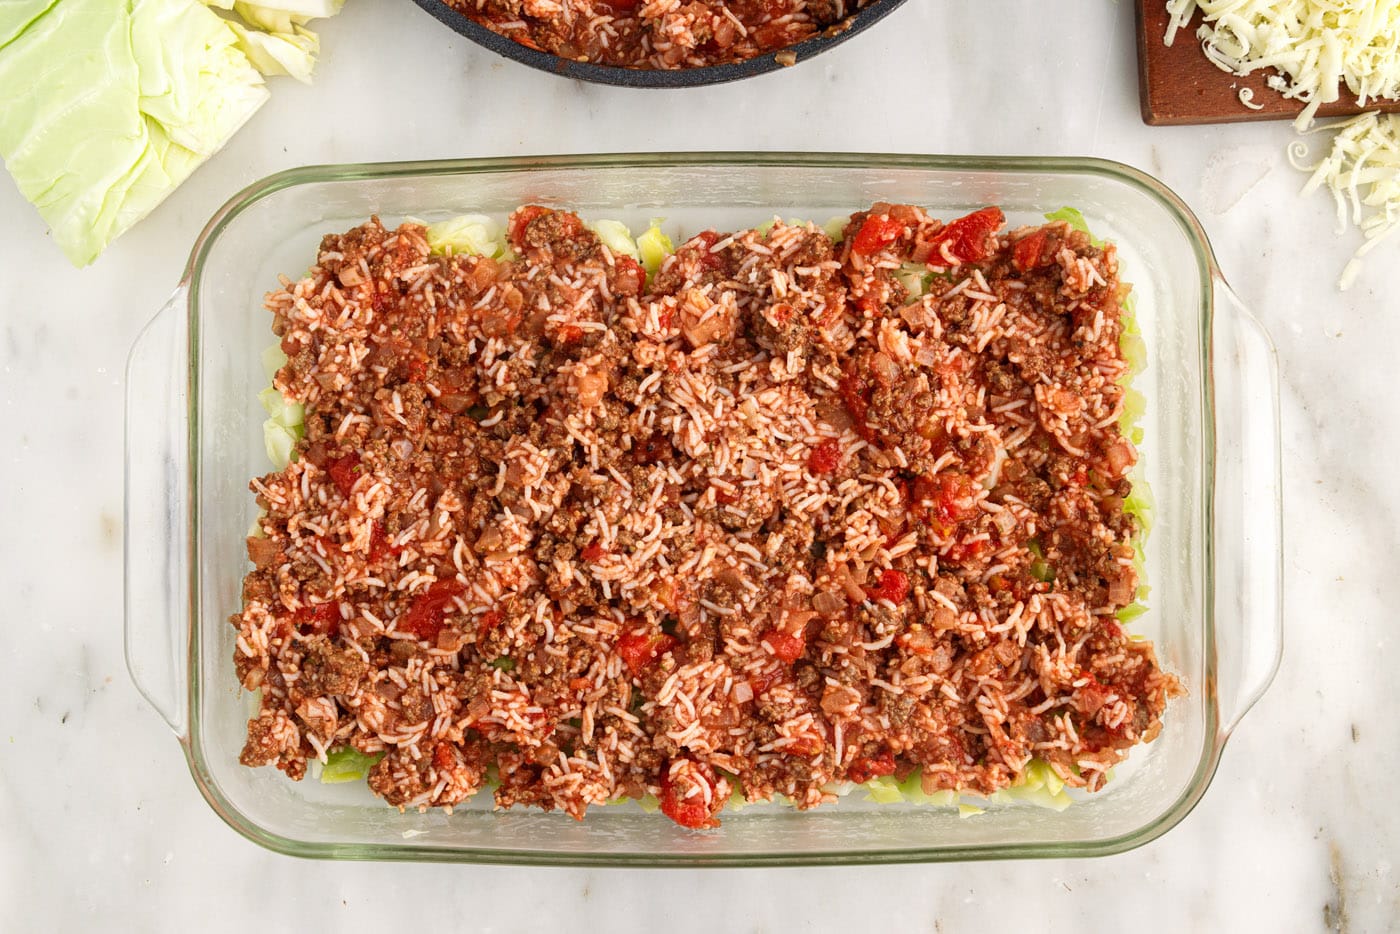 ground beef and rice mixture on top of cabbage in a dish